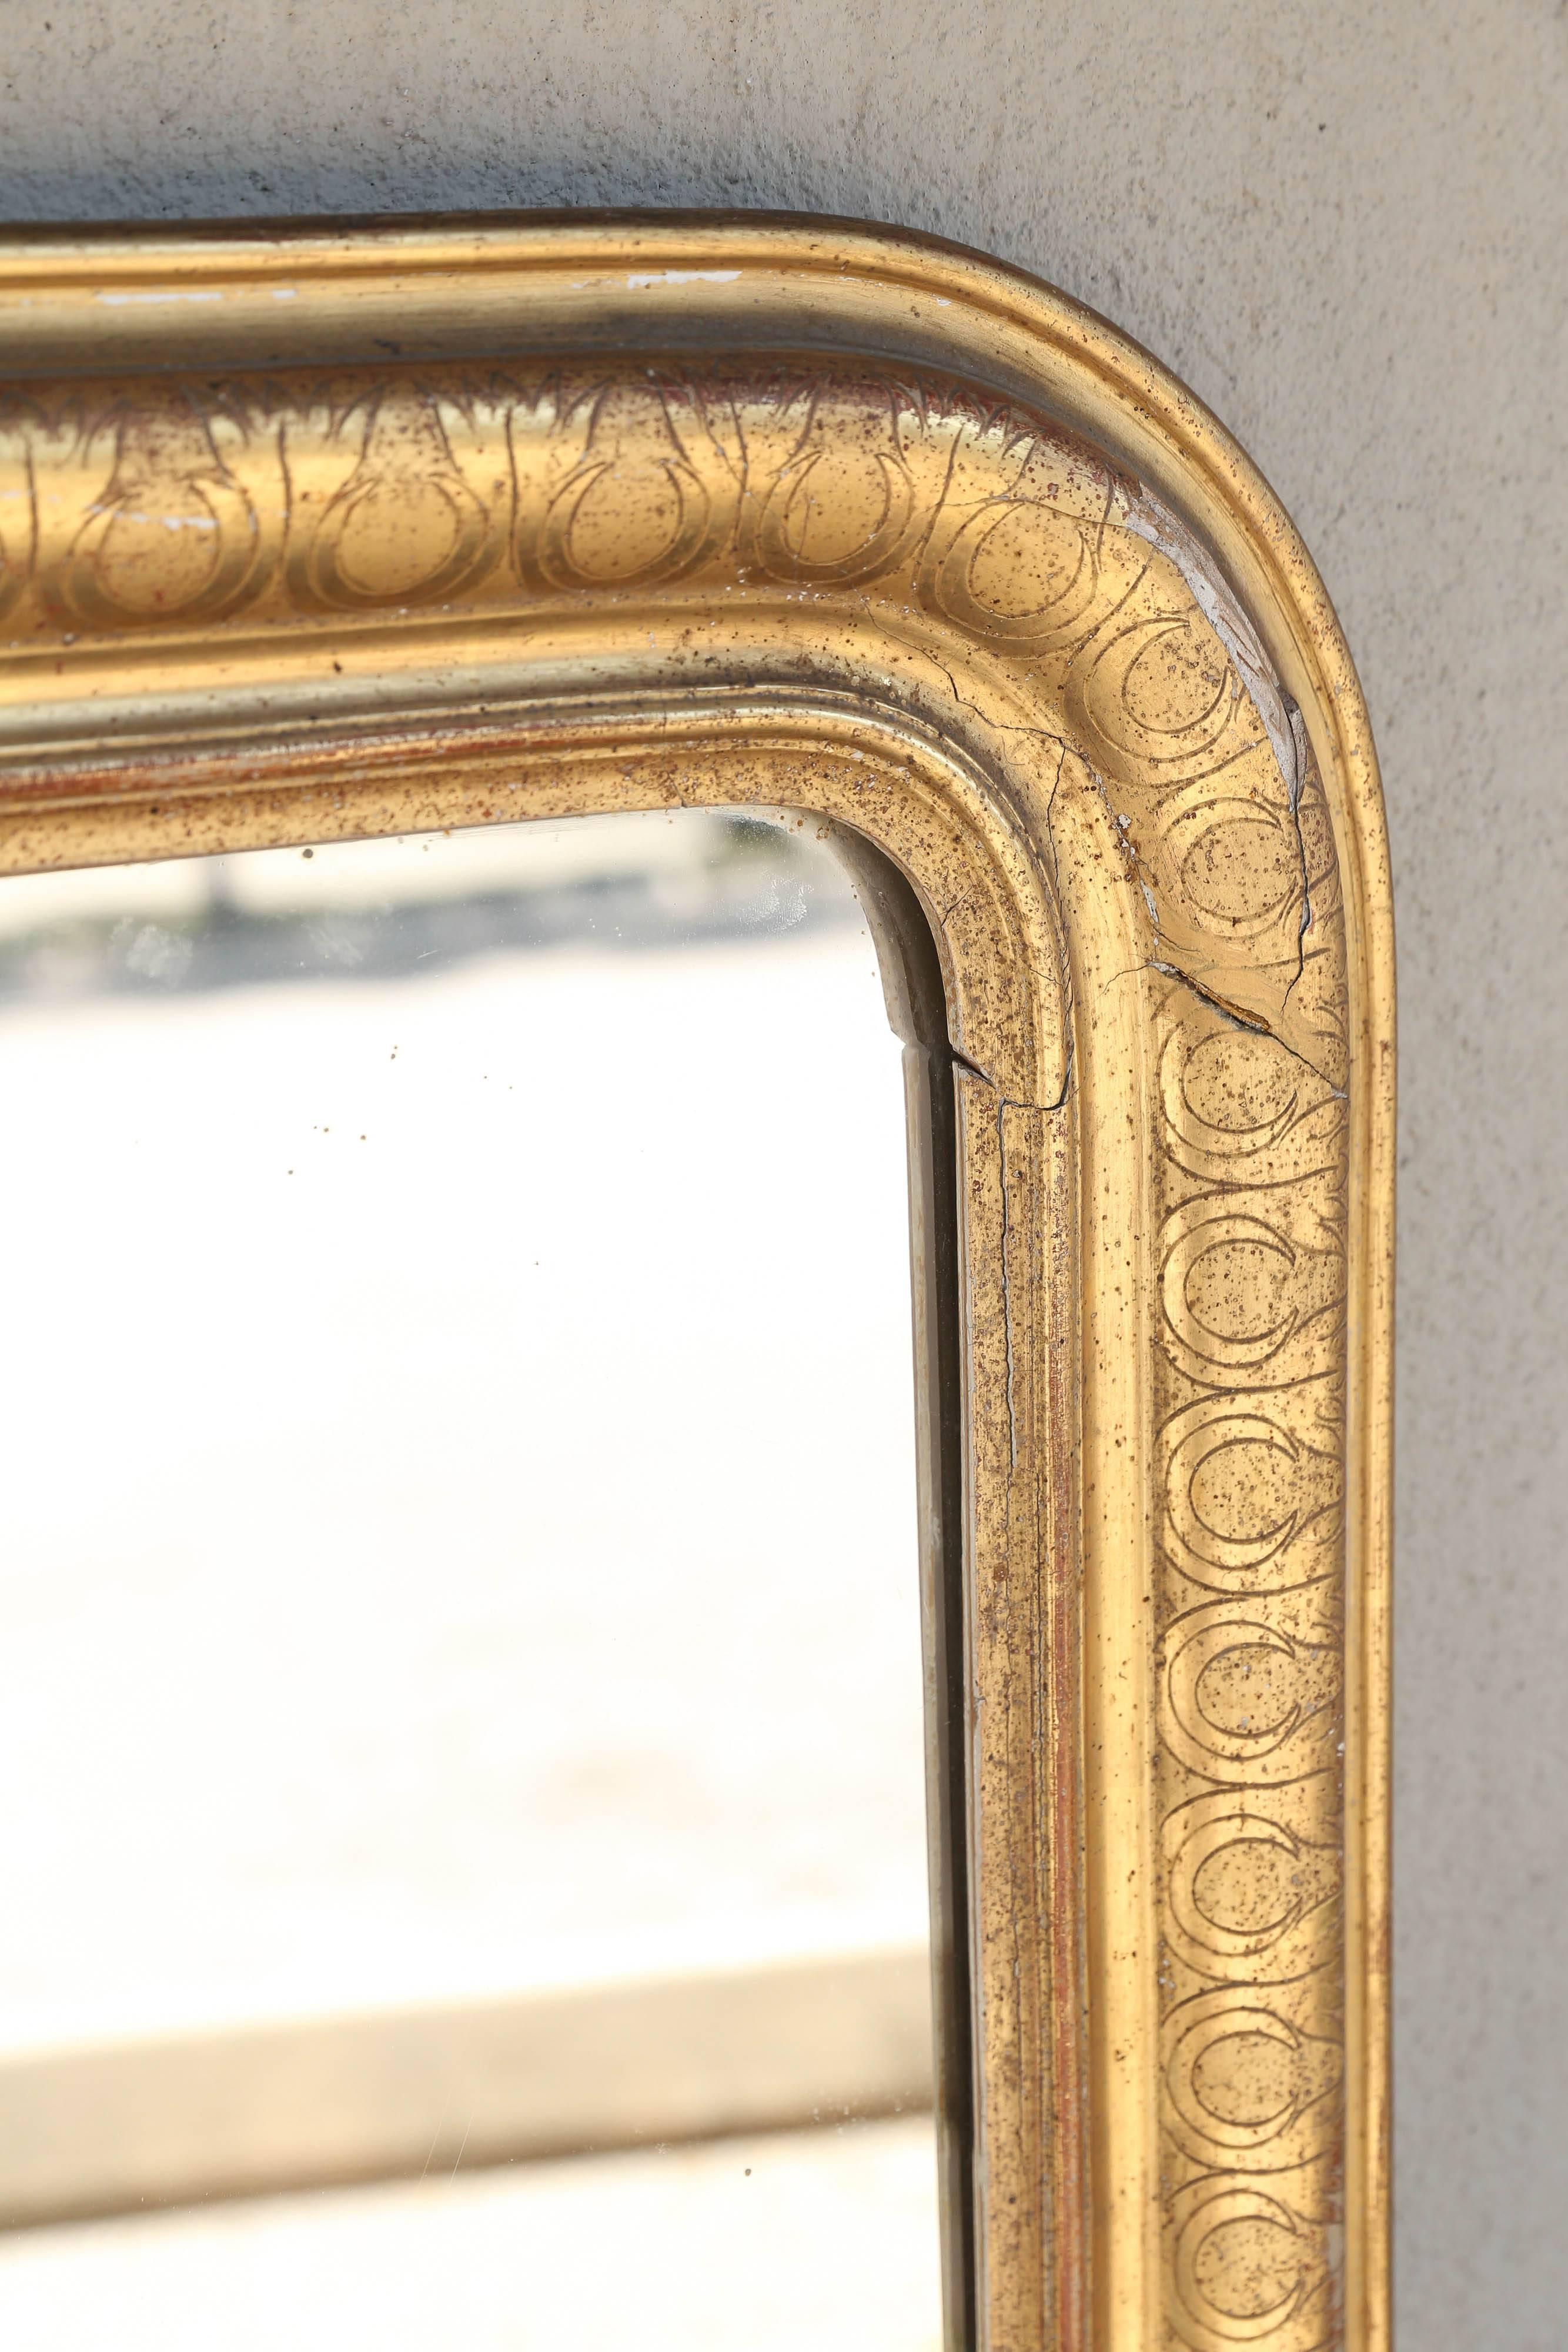 This antique French mirror features a wonderful carved, gilt frame with a gorgeous nouveau pattern. The inter-locked pattern looks both geometric and organic. Touches of reds and greens also show through the gilt. Entire back is enclosed (shown).